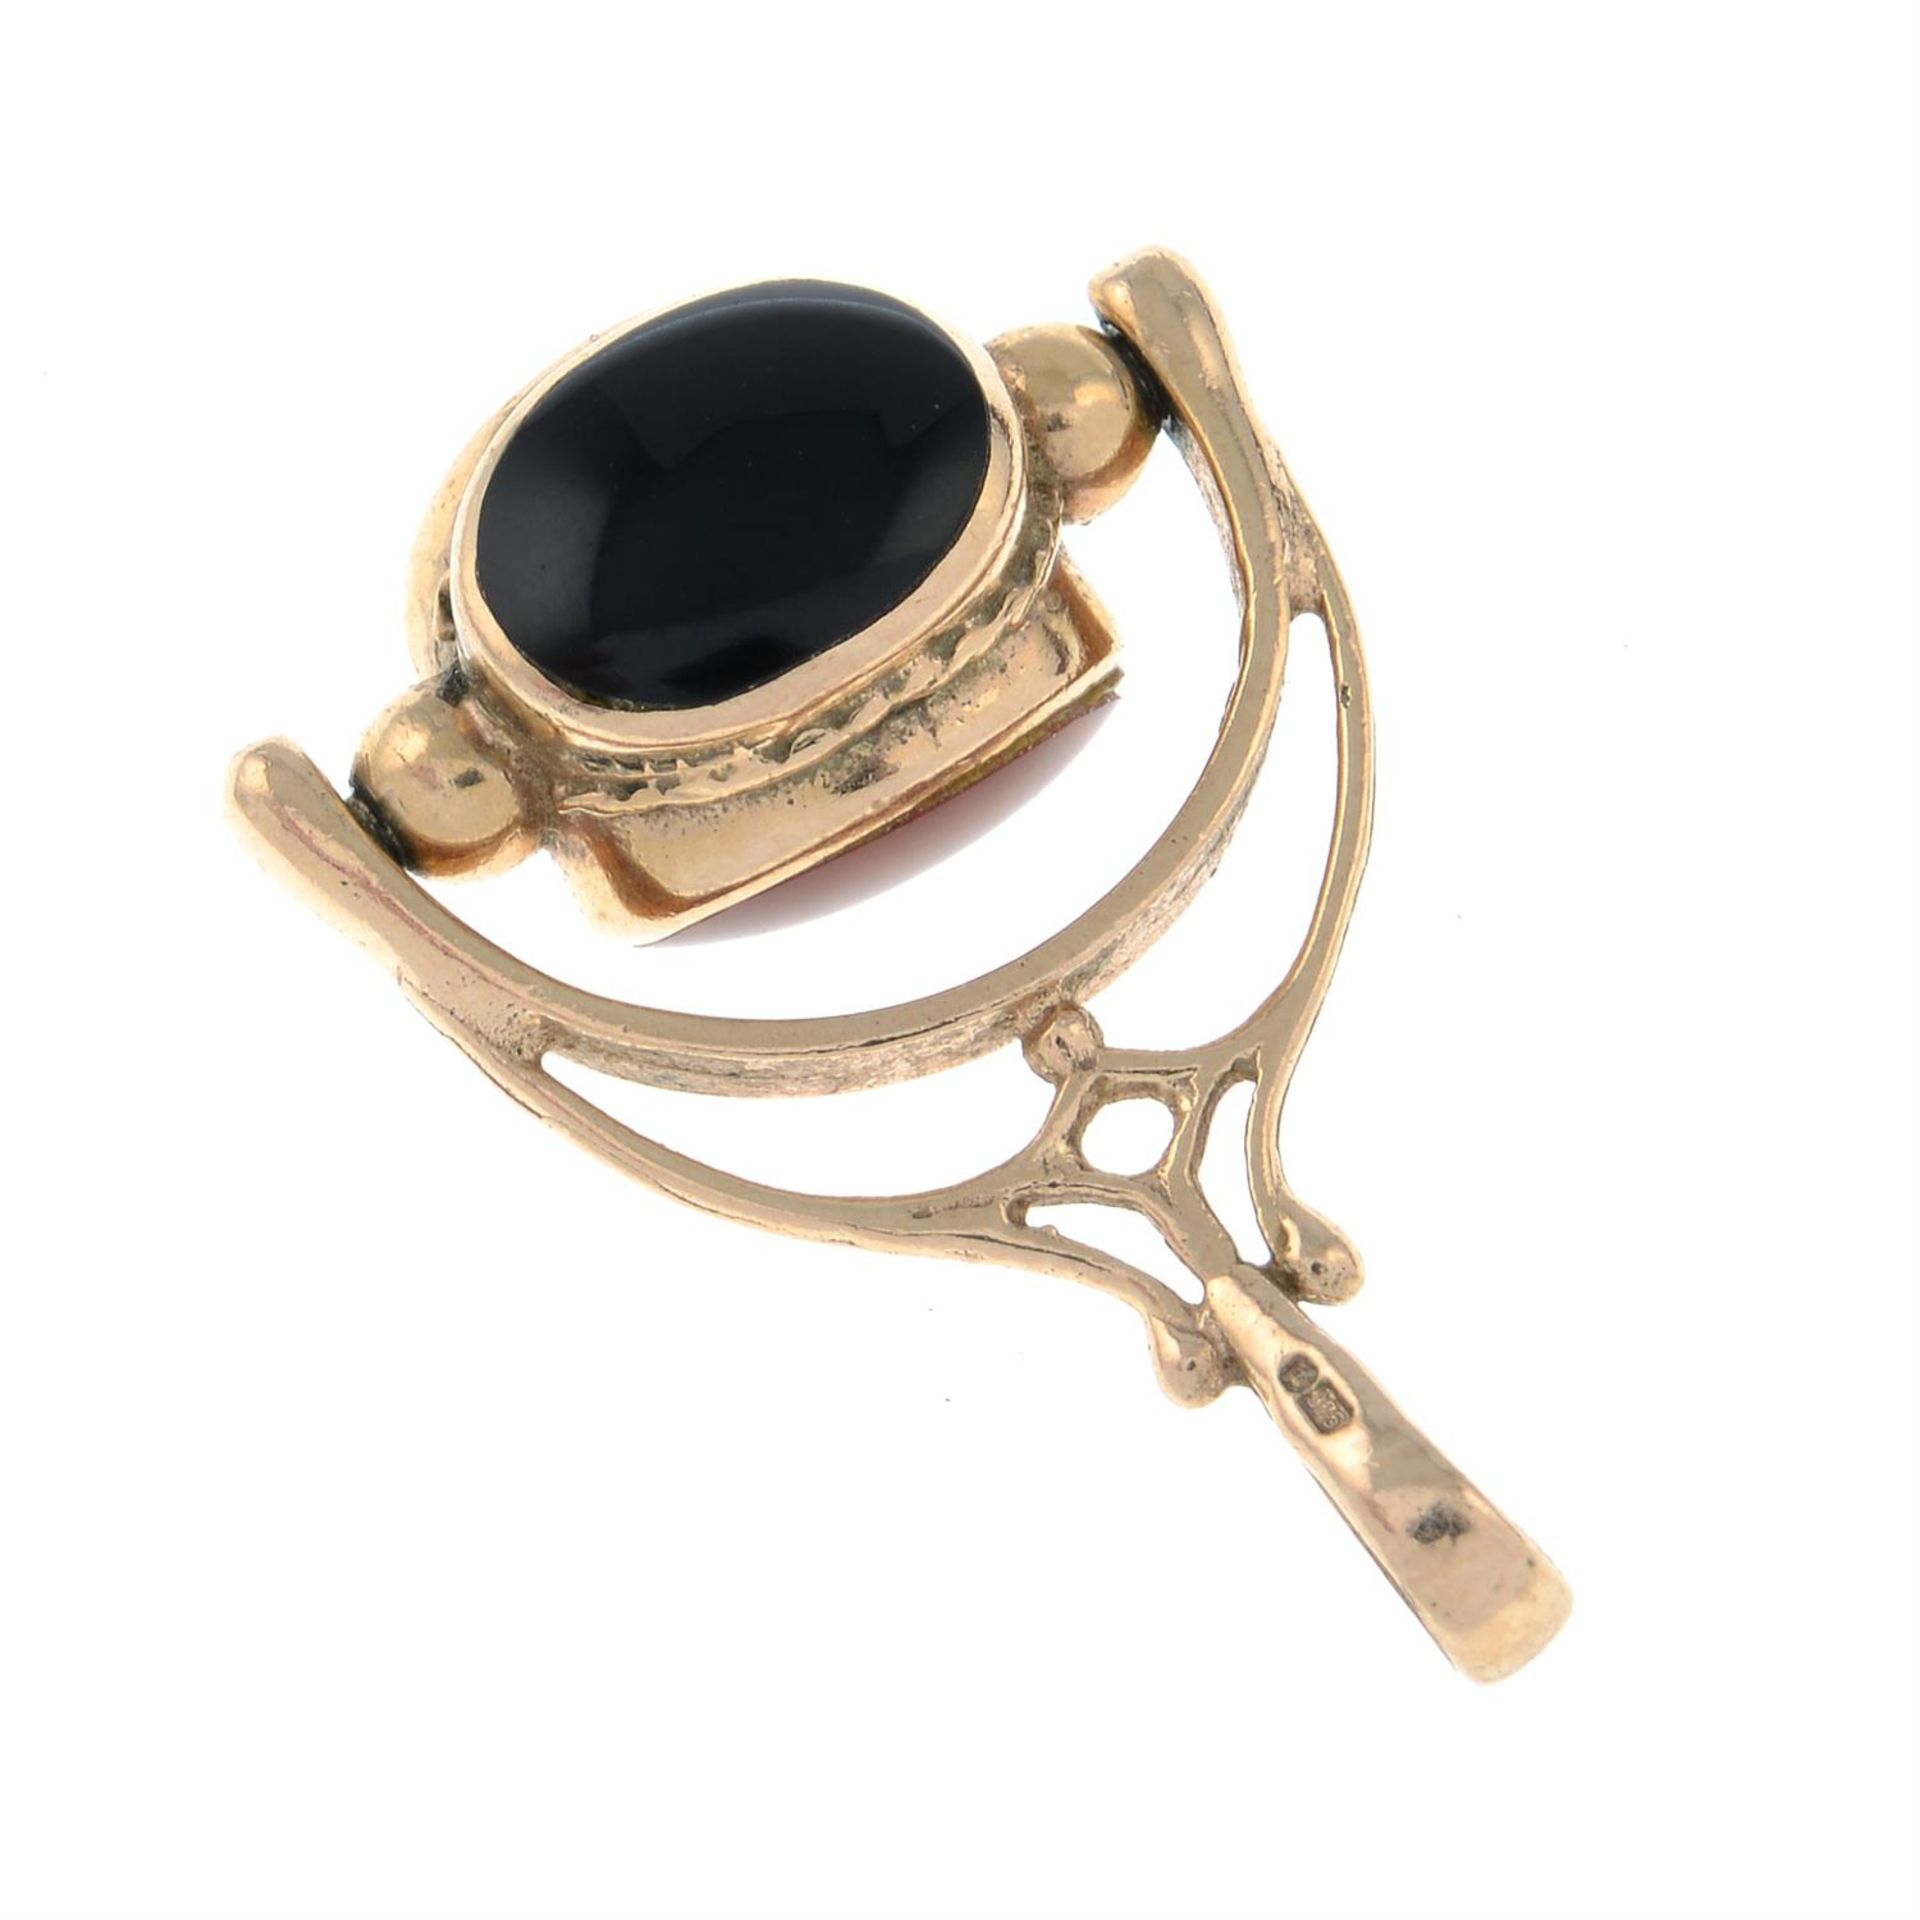 A 9ct gold carnelian, bloodstone and onyx swivel fob charm. - Image 2 of 2